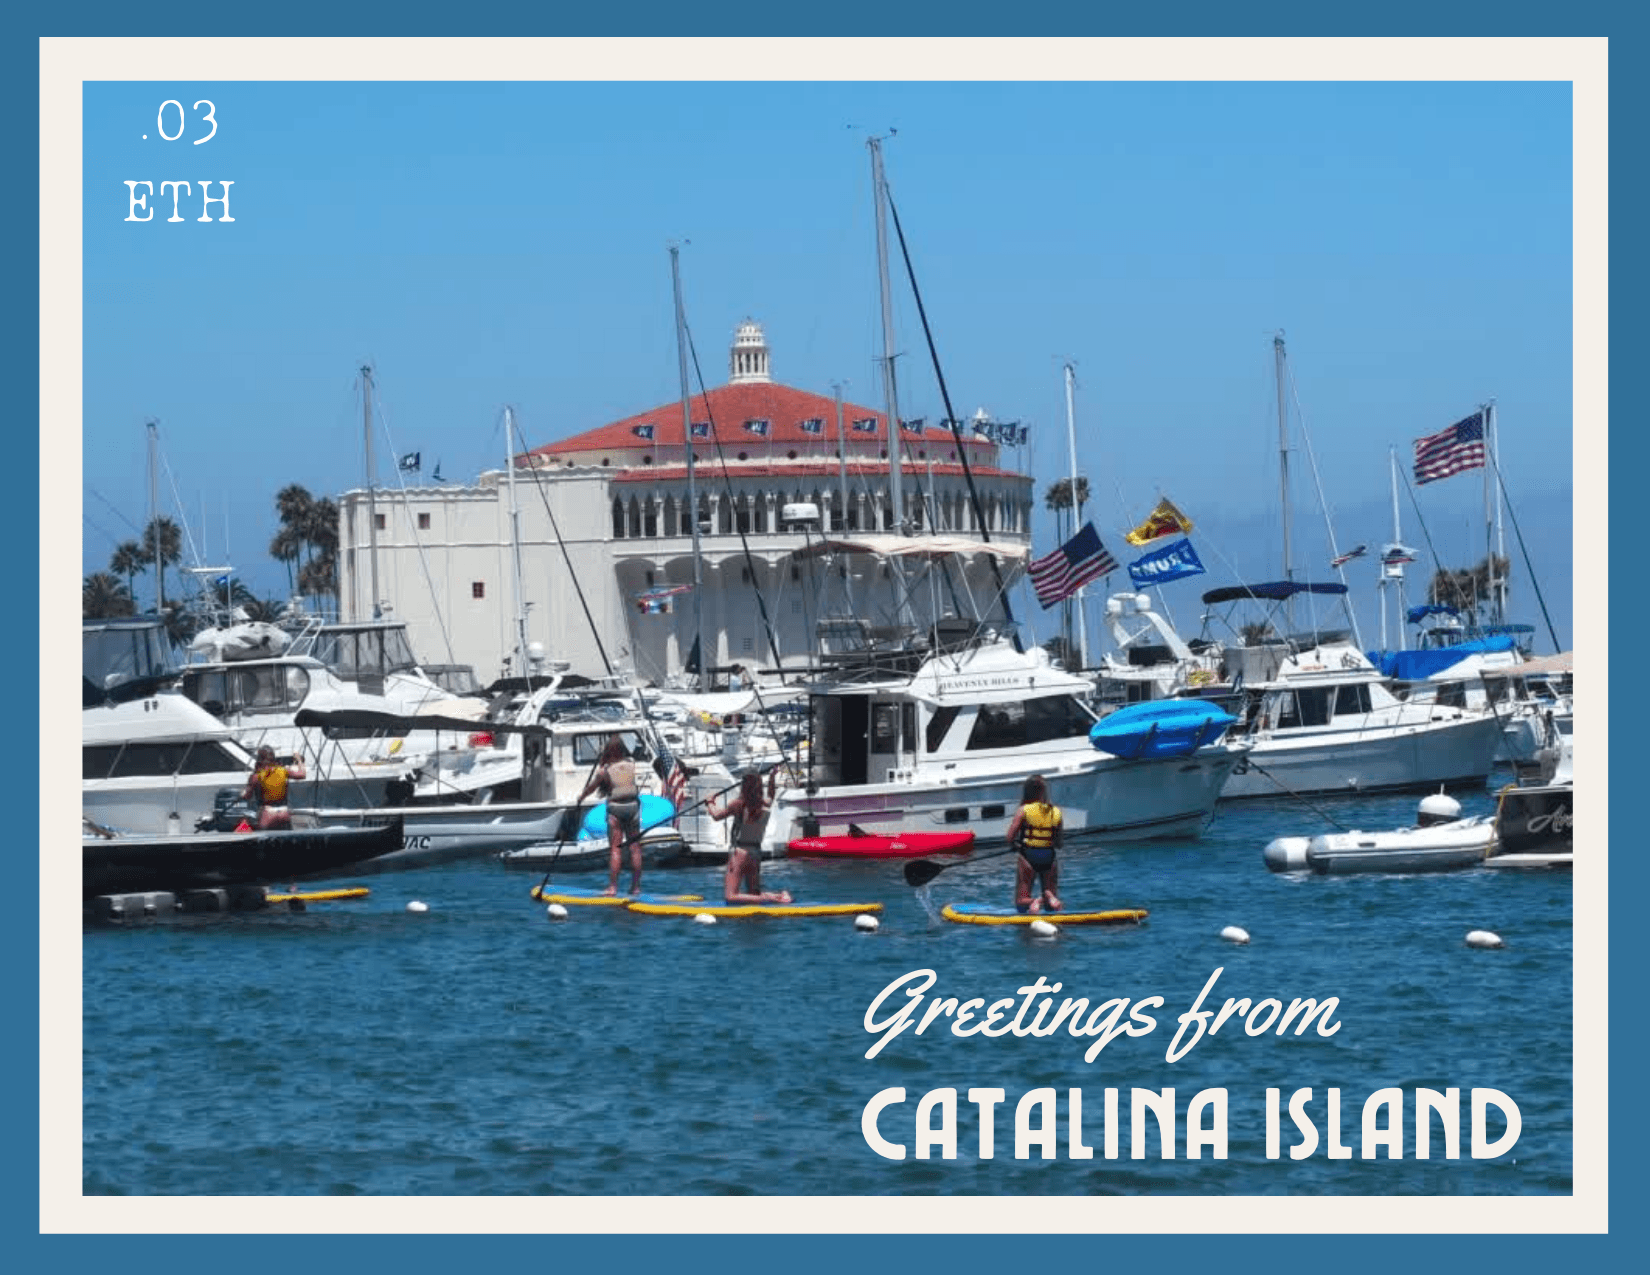 001 Greetings from Catalina Island